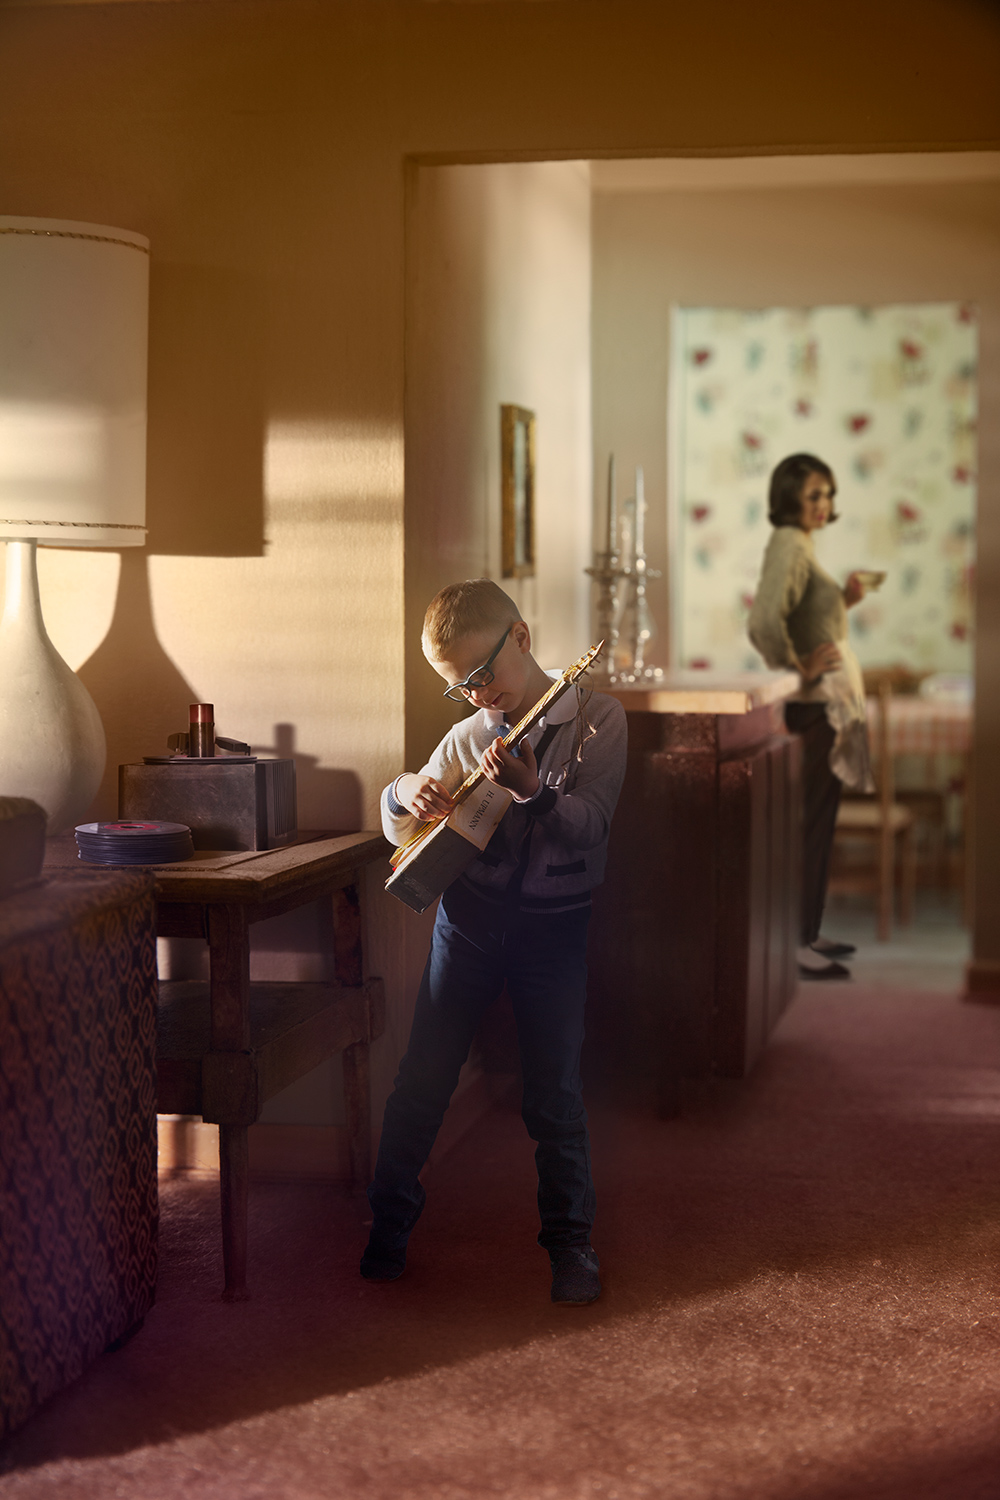 Boy enthusiastically playing toy guitar in 1960s suburban living room miniature dollhouse set